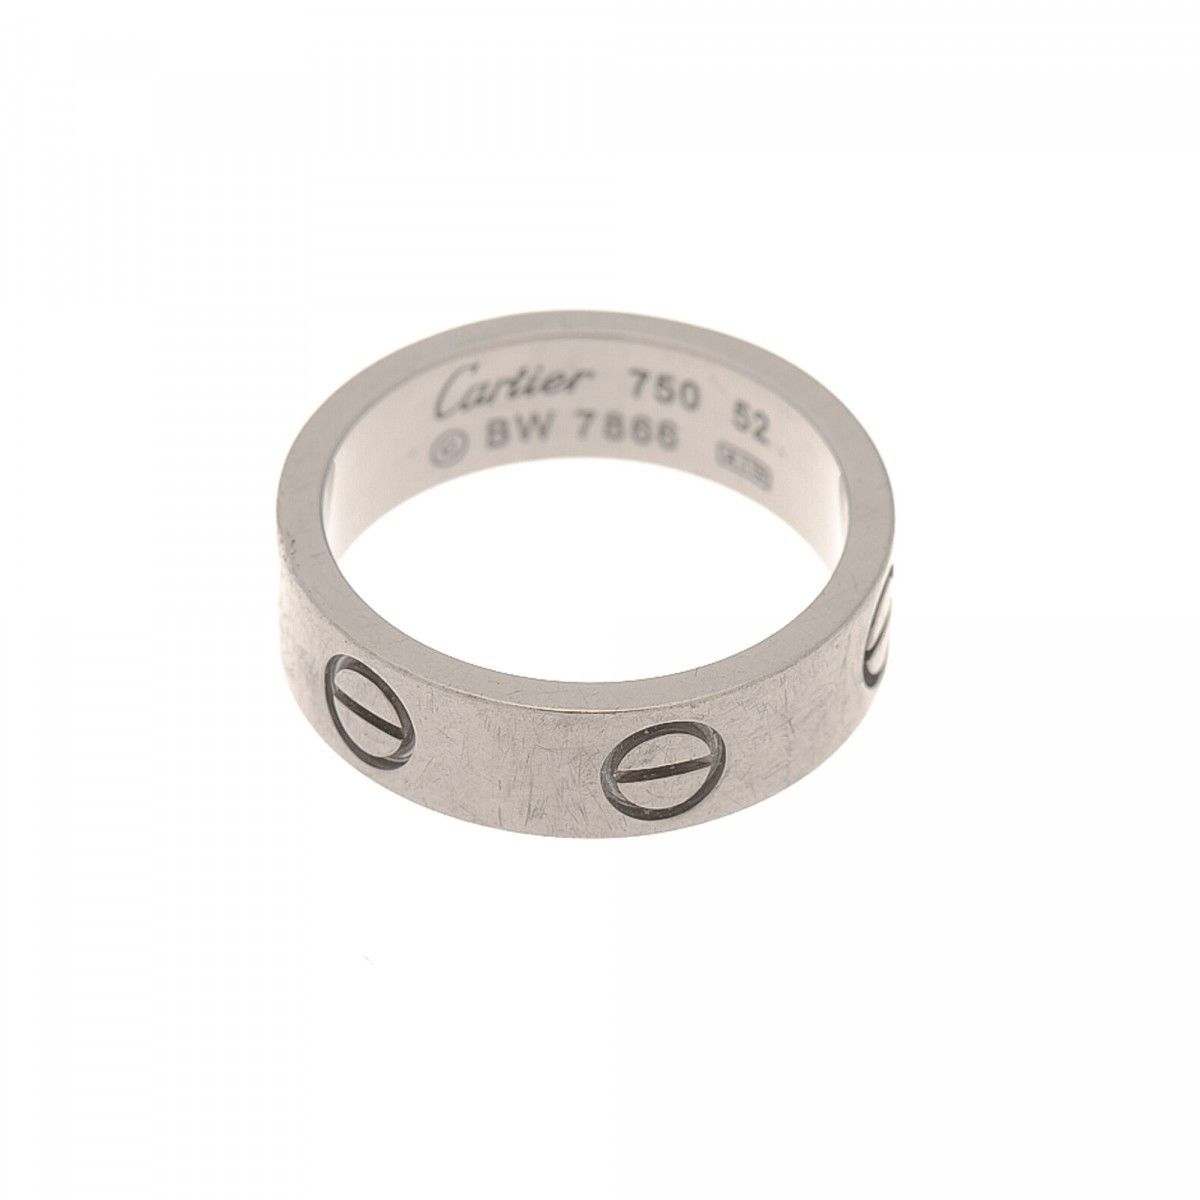 Cartier ring serial number lookup